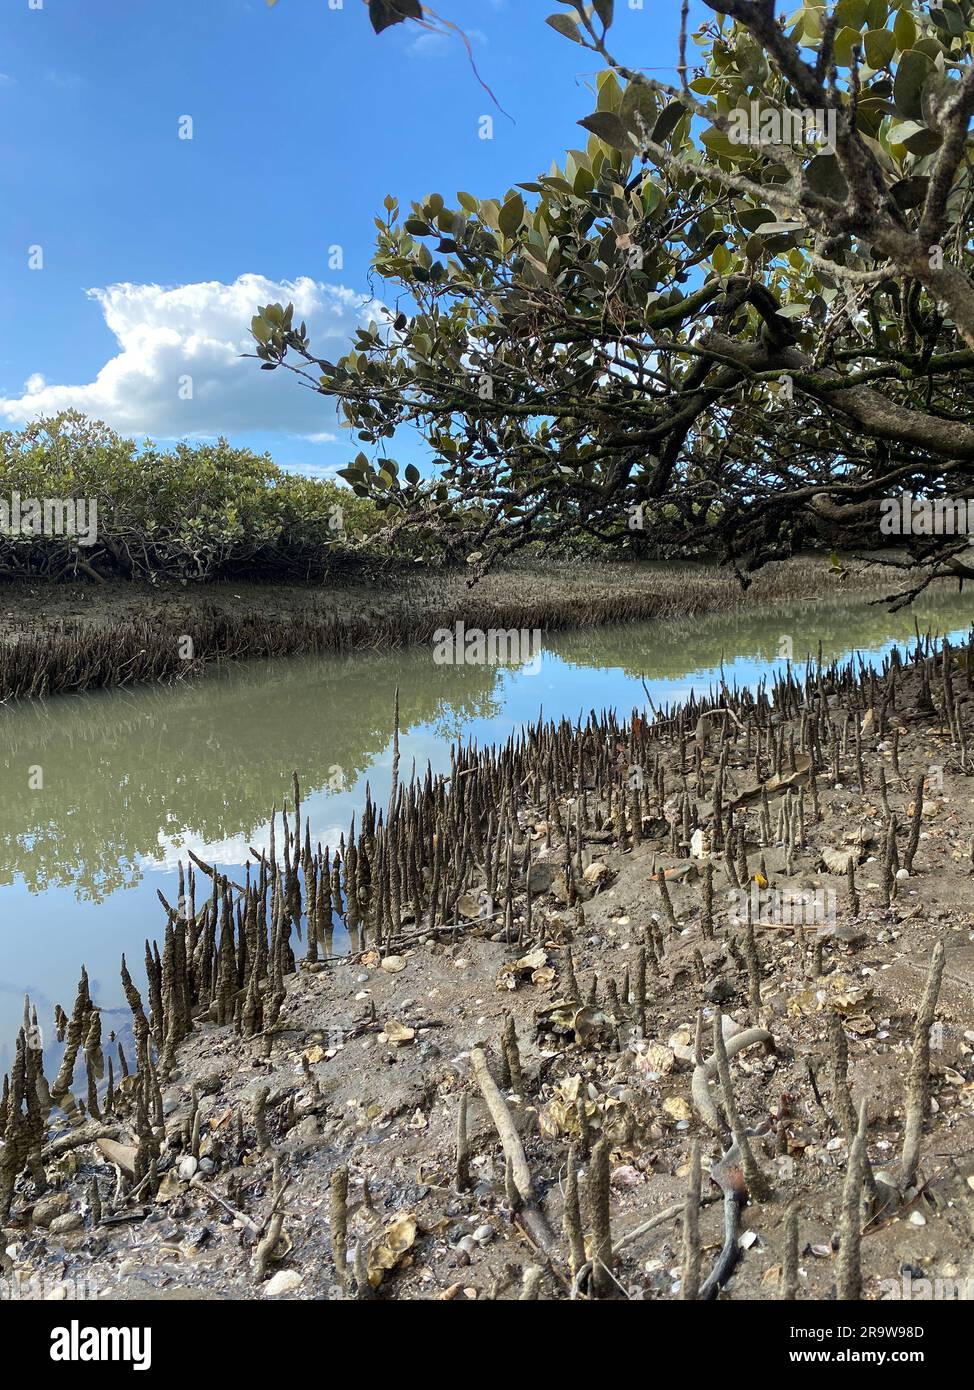 Green young Mangrove trees and pnematophores - roots growing from the bottom up for gas exchange. Planting mangroves in coastal sea lane, New Zealand. Stock Photo